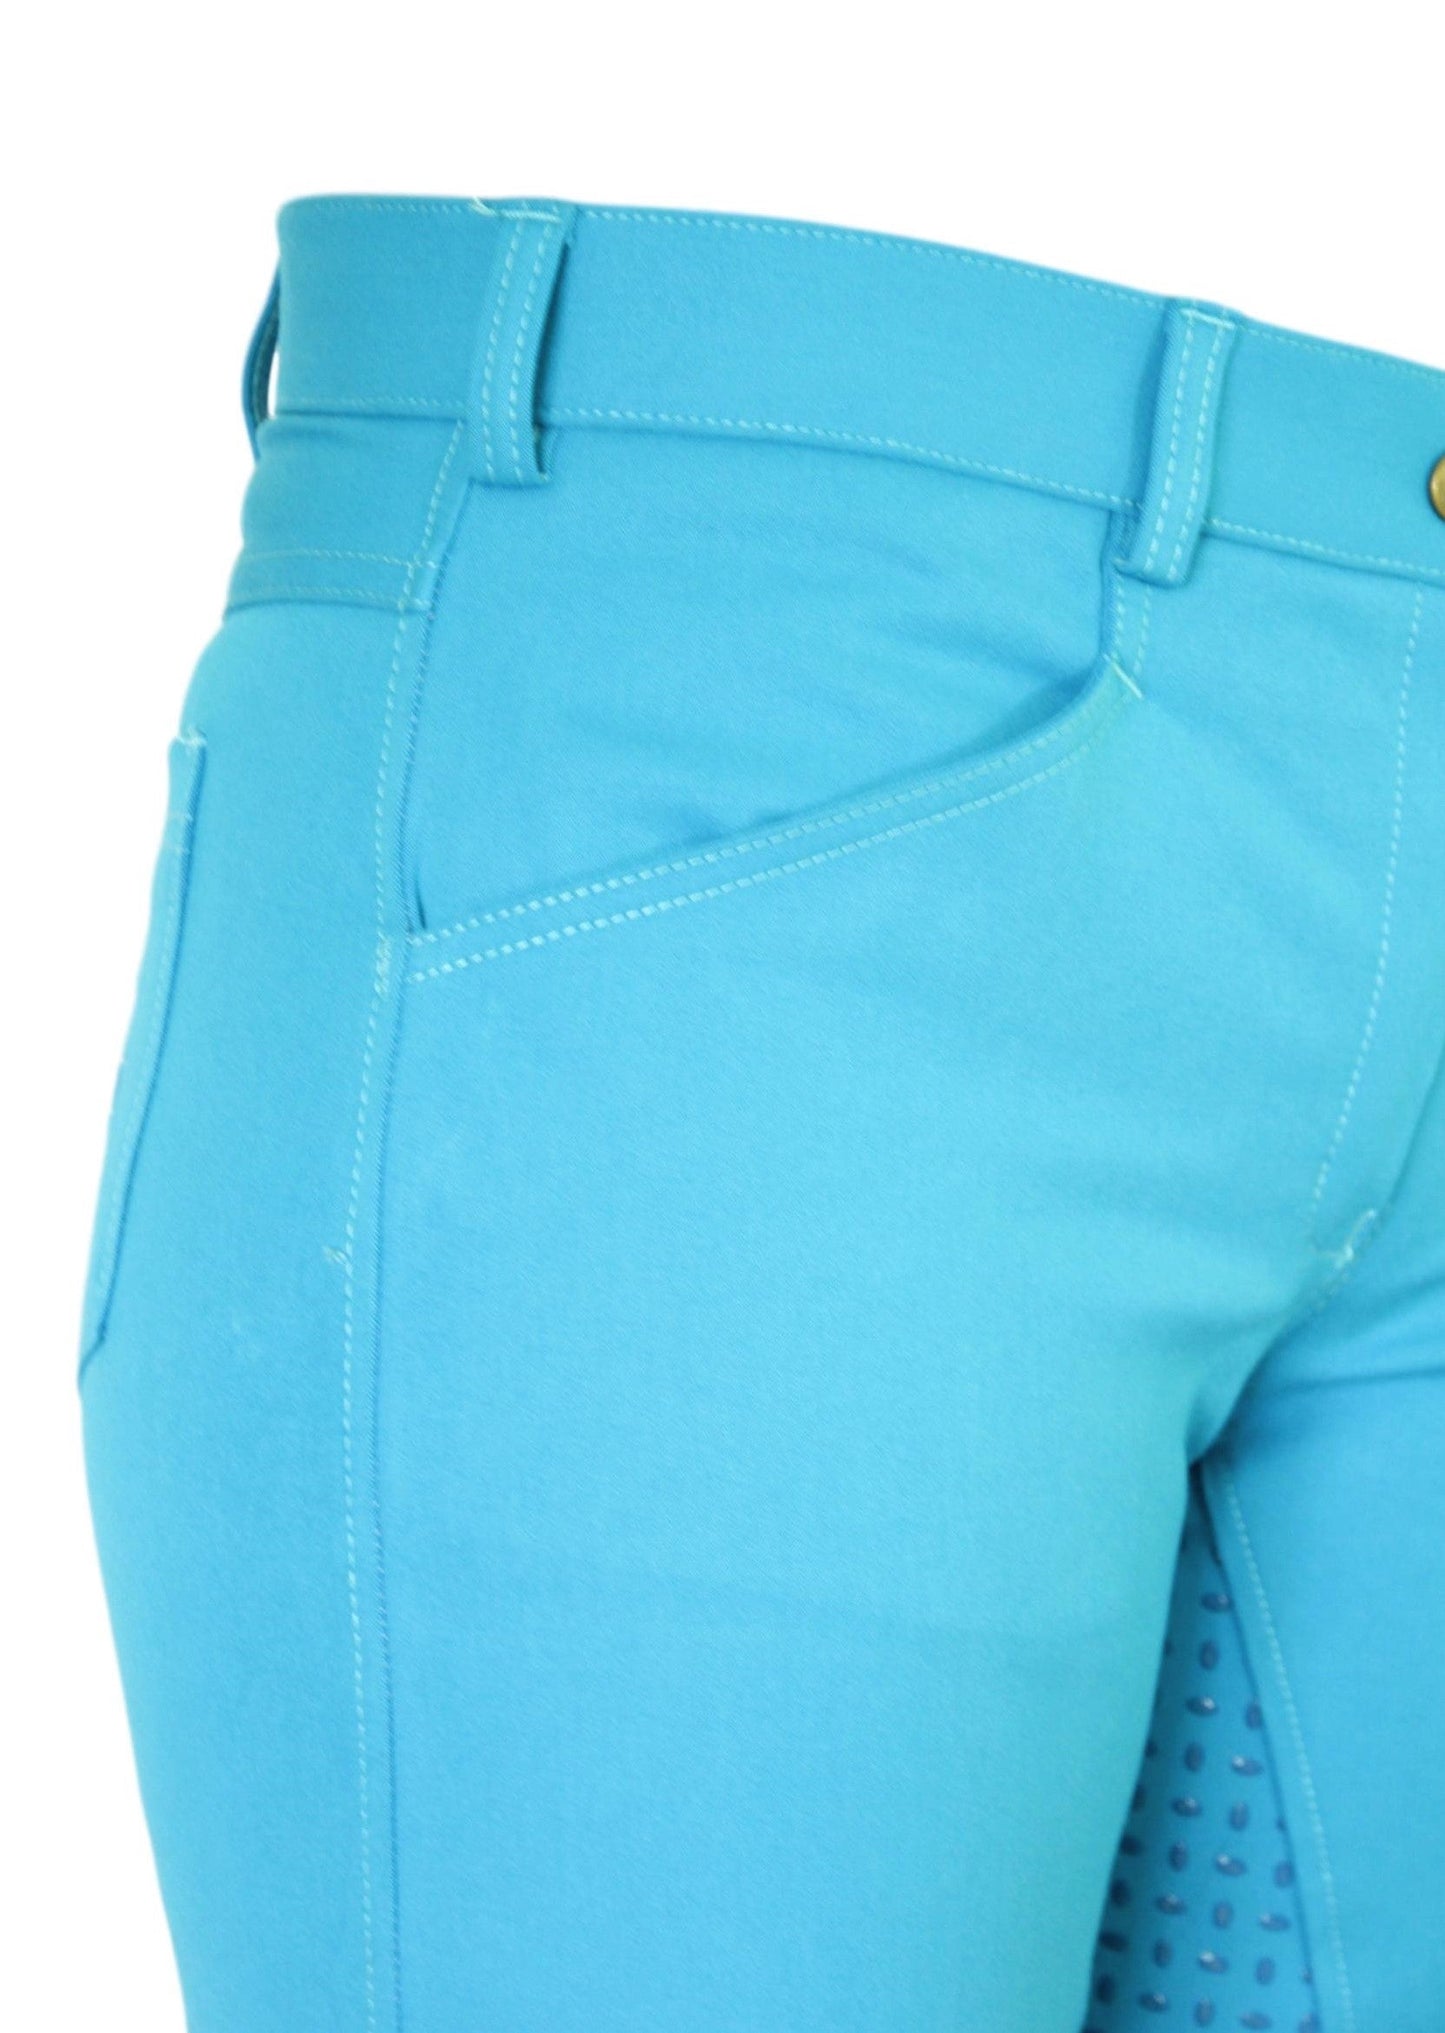 Micro Woven Cotton Blend Jodhpurs in Turquoise - Final runout, Last sizes-Plum Tack-The Equestrian